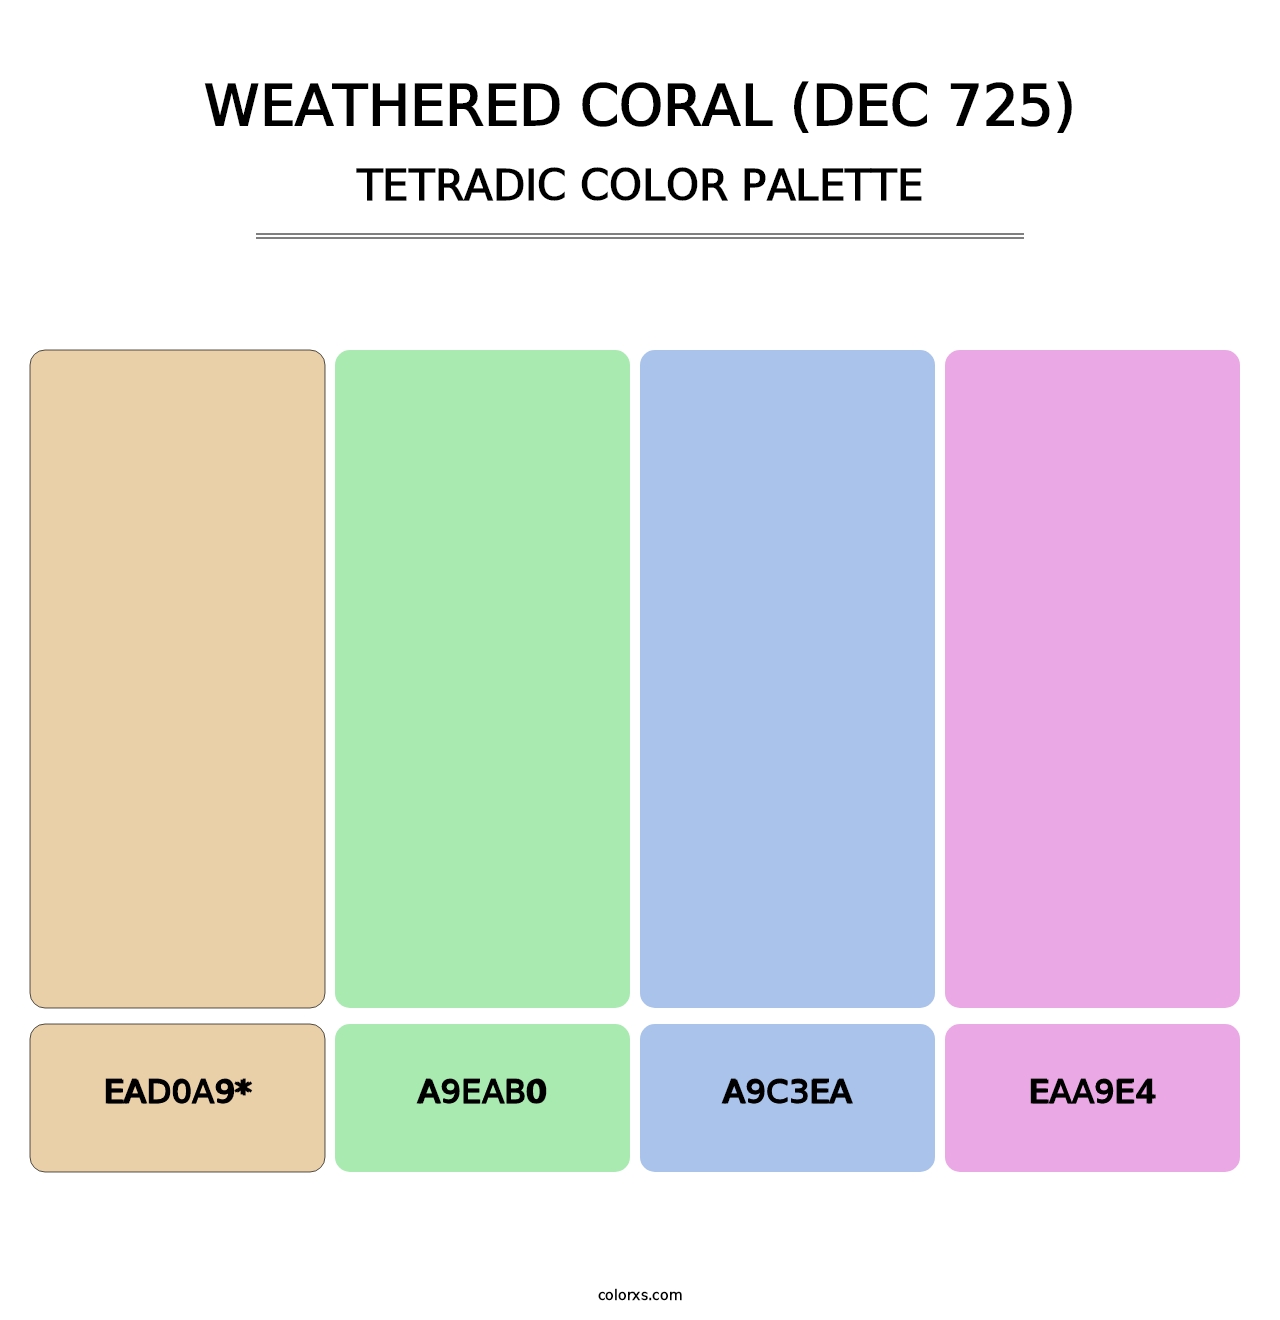 Weathered Coral (DEC 725) - Tetradic Color Palette